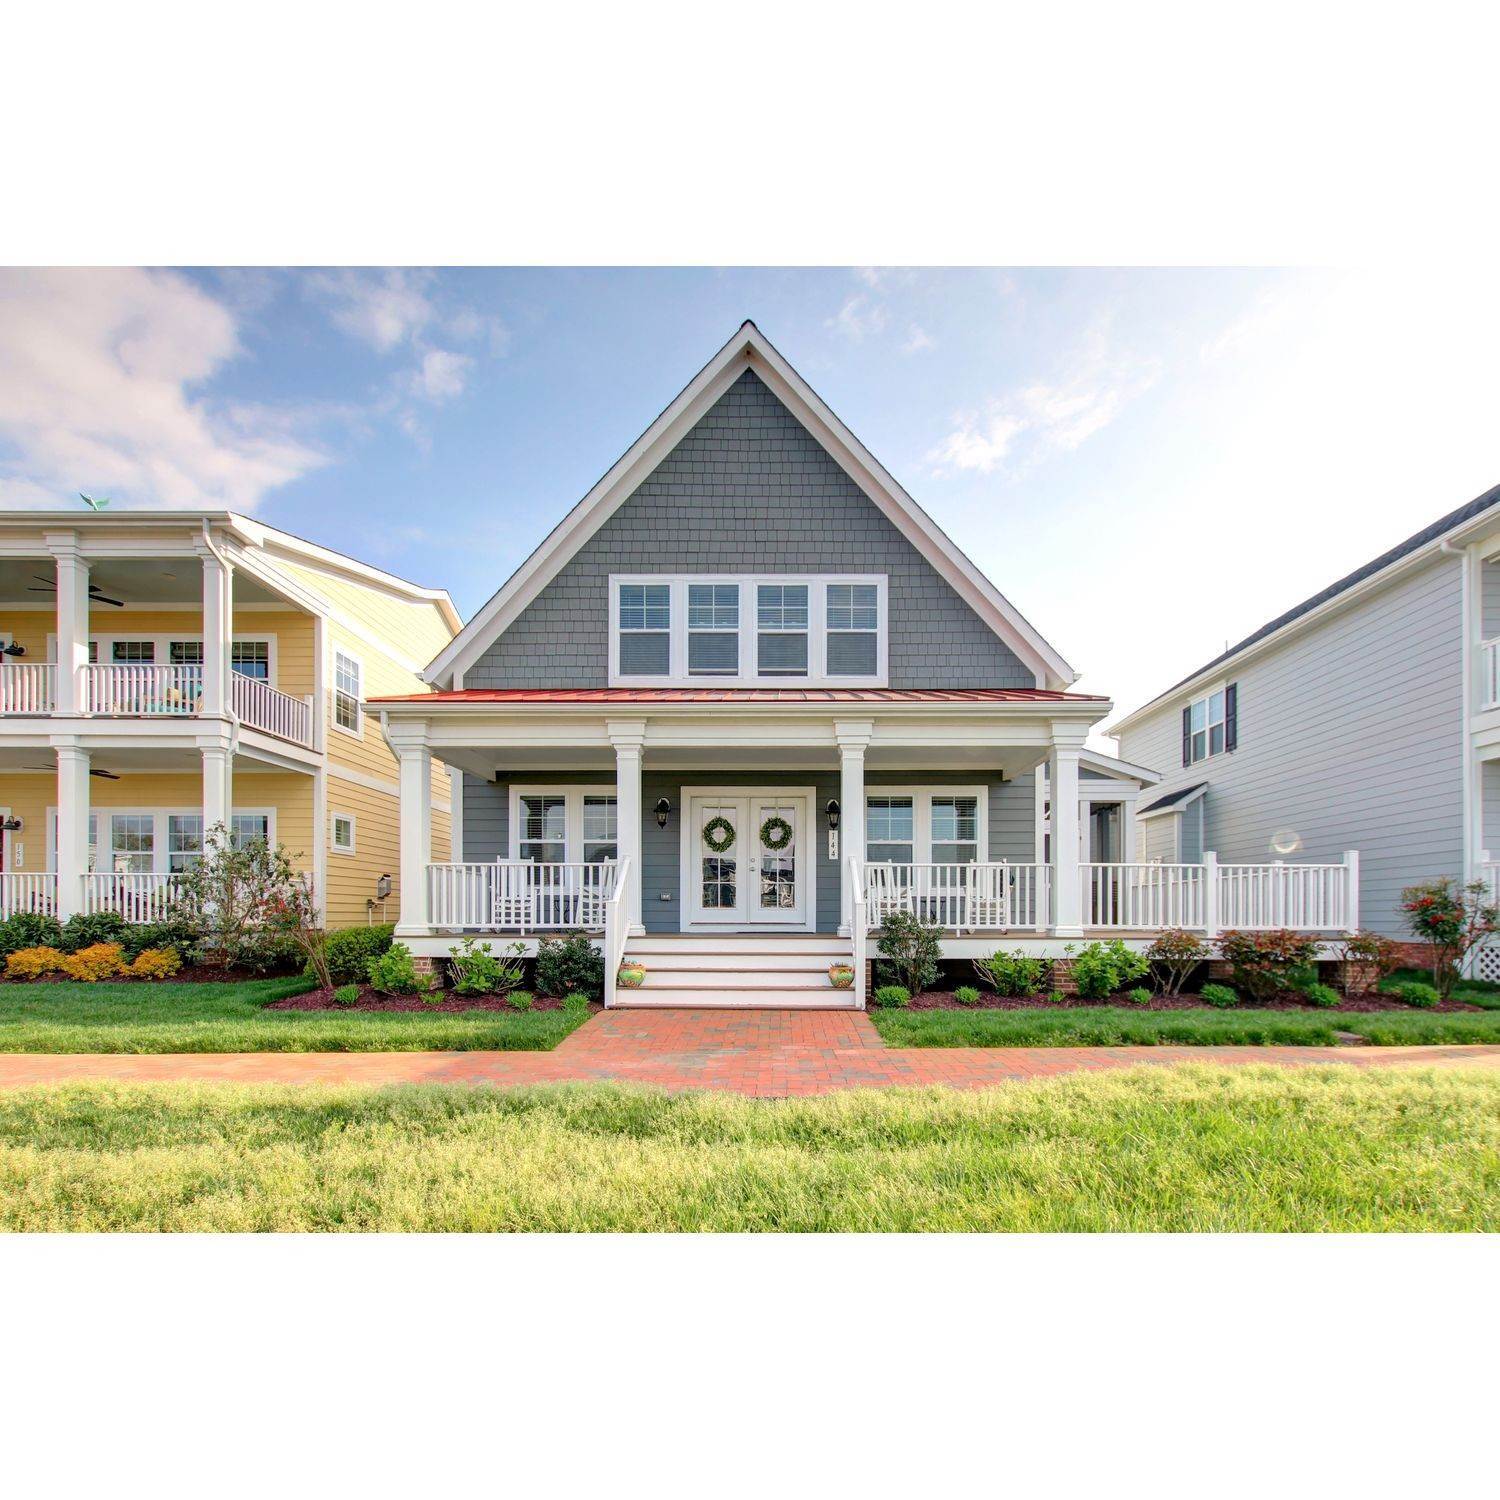 10. Covell Signature Homes building at 110 Channel Marker Way, Grasonville, MD 21638